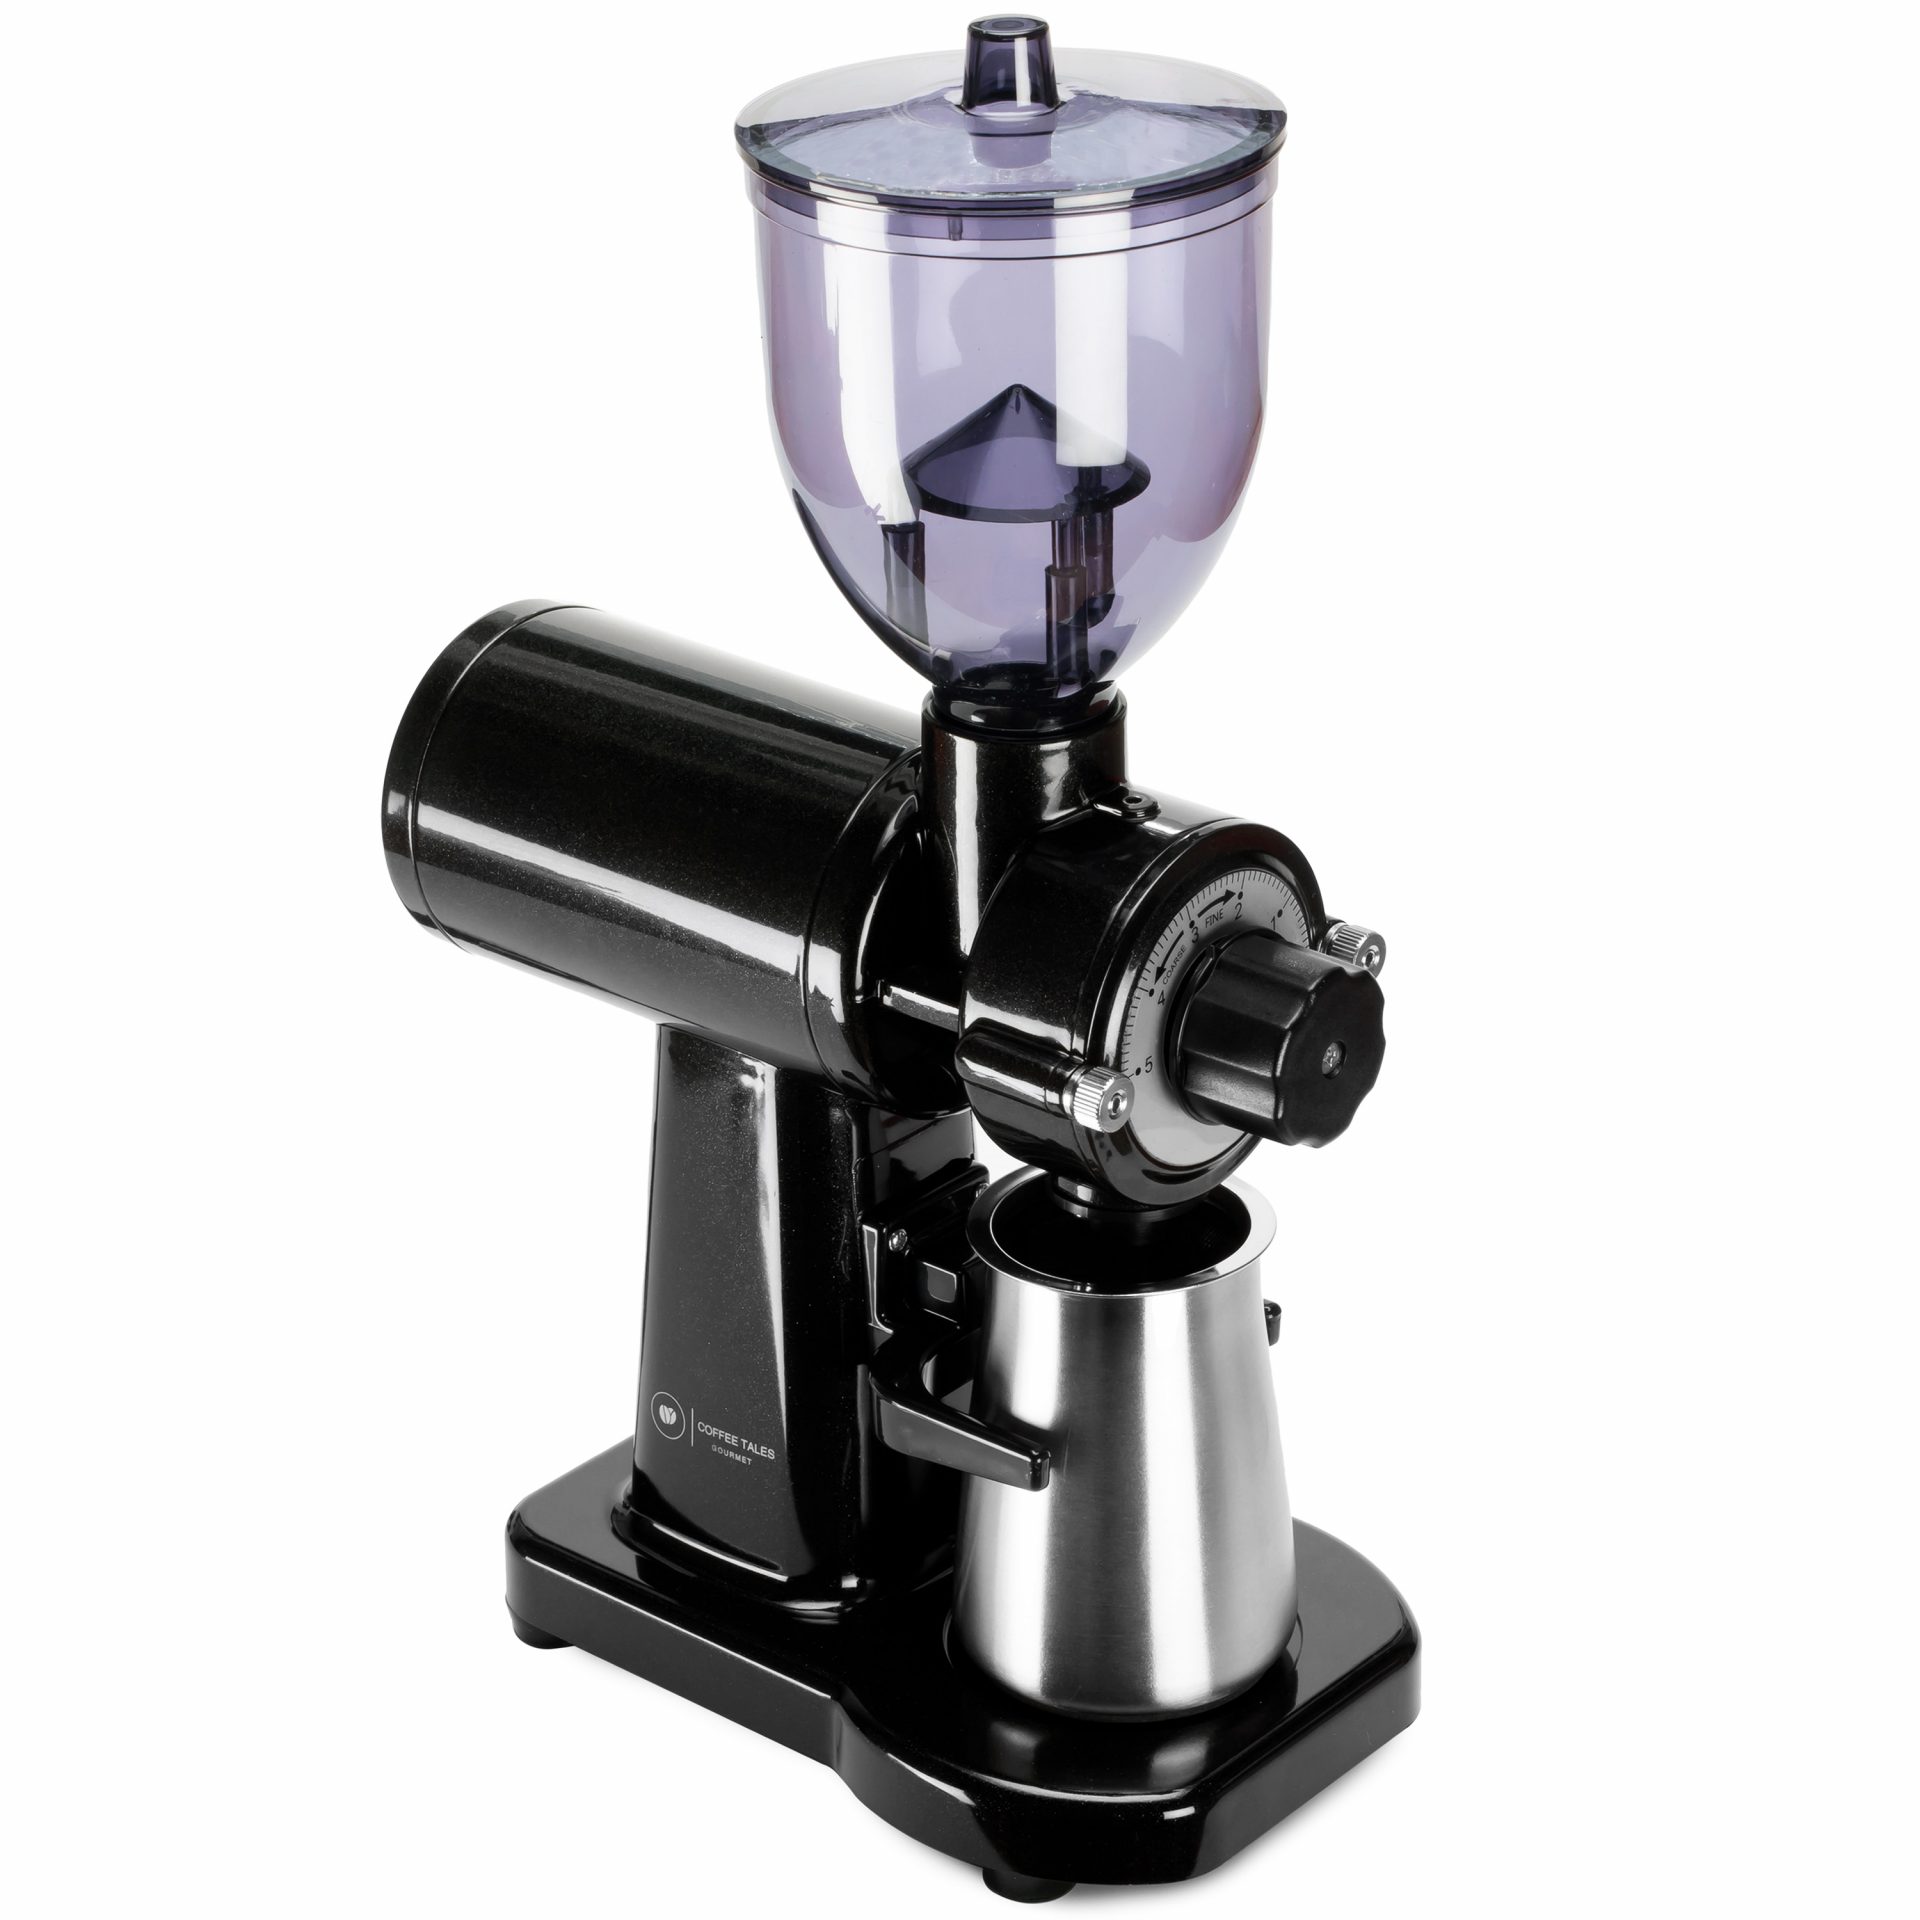 https://thecoffeetales.com/wp-content/uploads/2021/07/electric-grinder-main.jpg